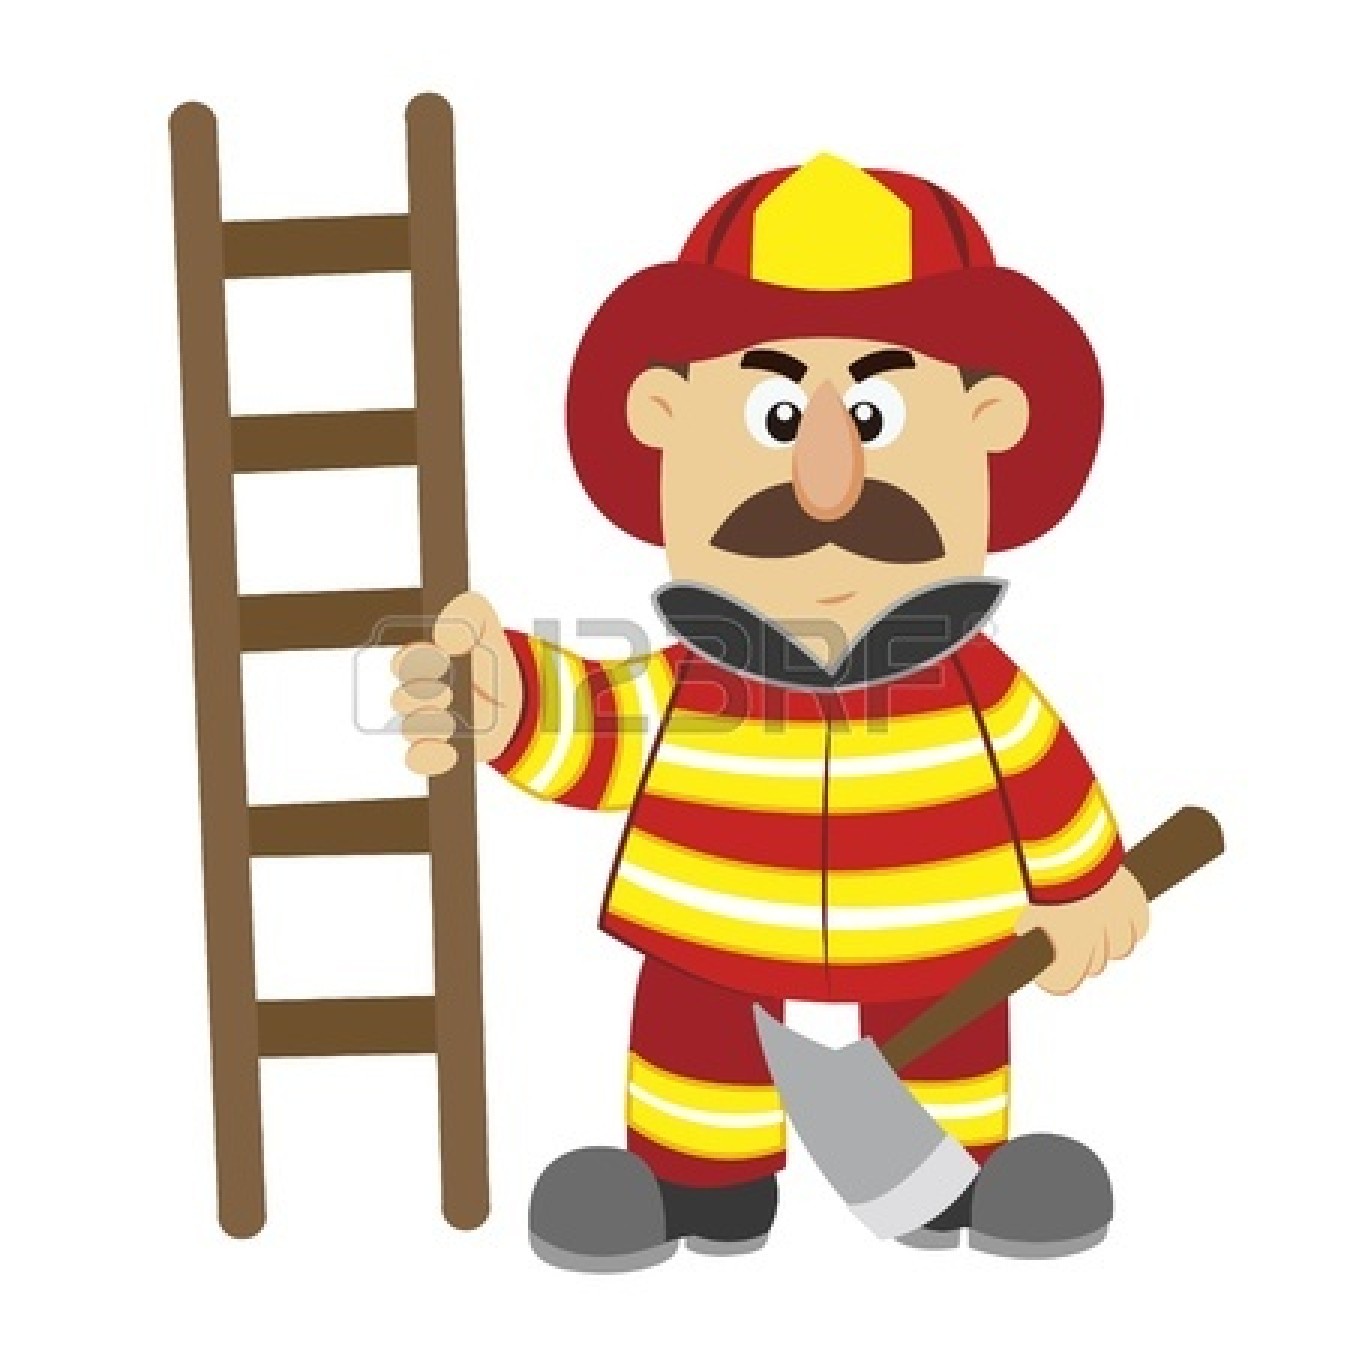 Firefighter Hat Cartoon   Clipart Panda   Free Clipart Images